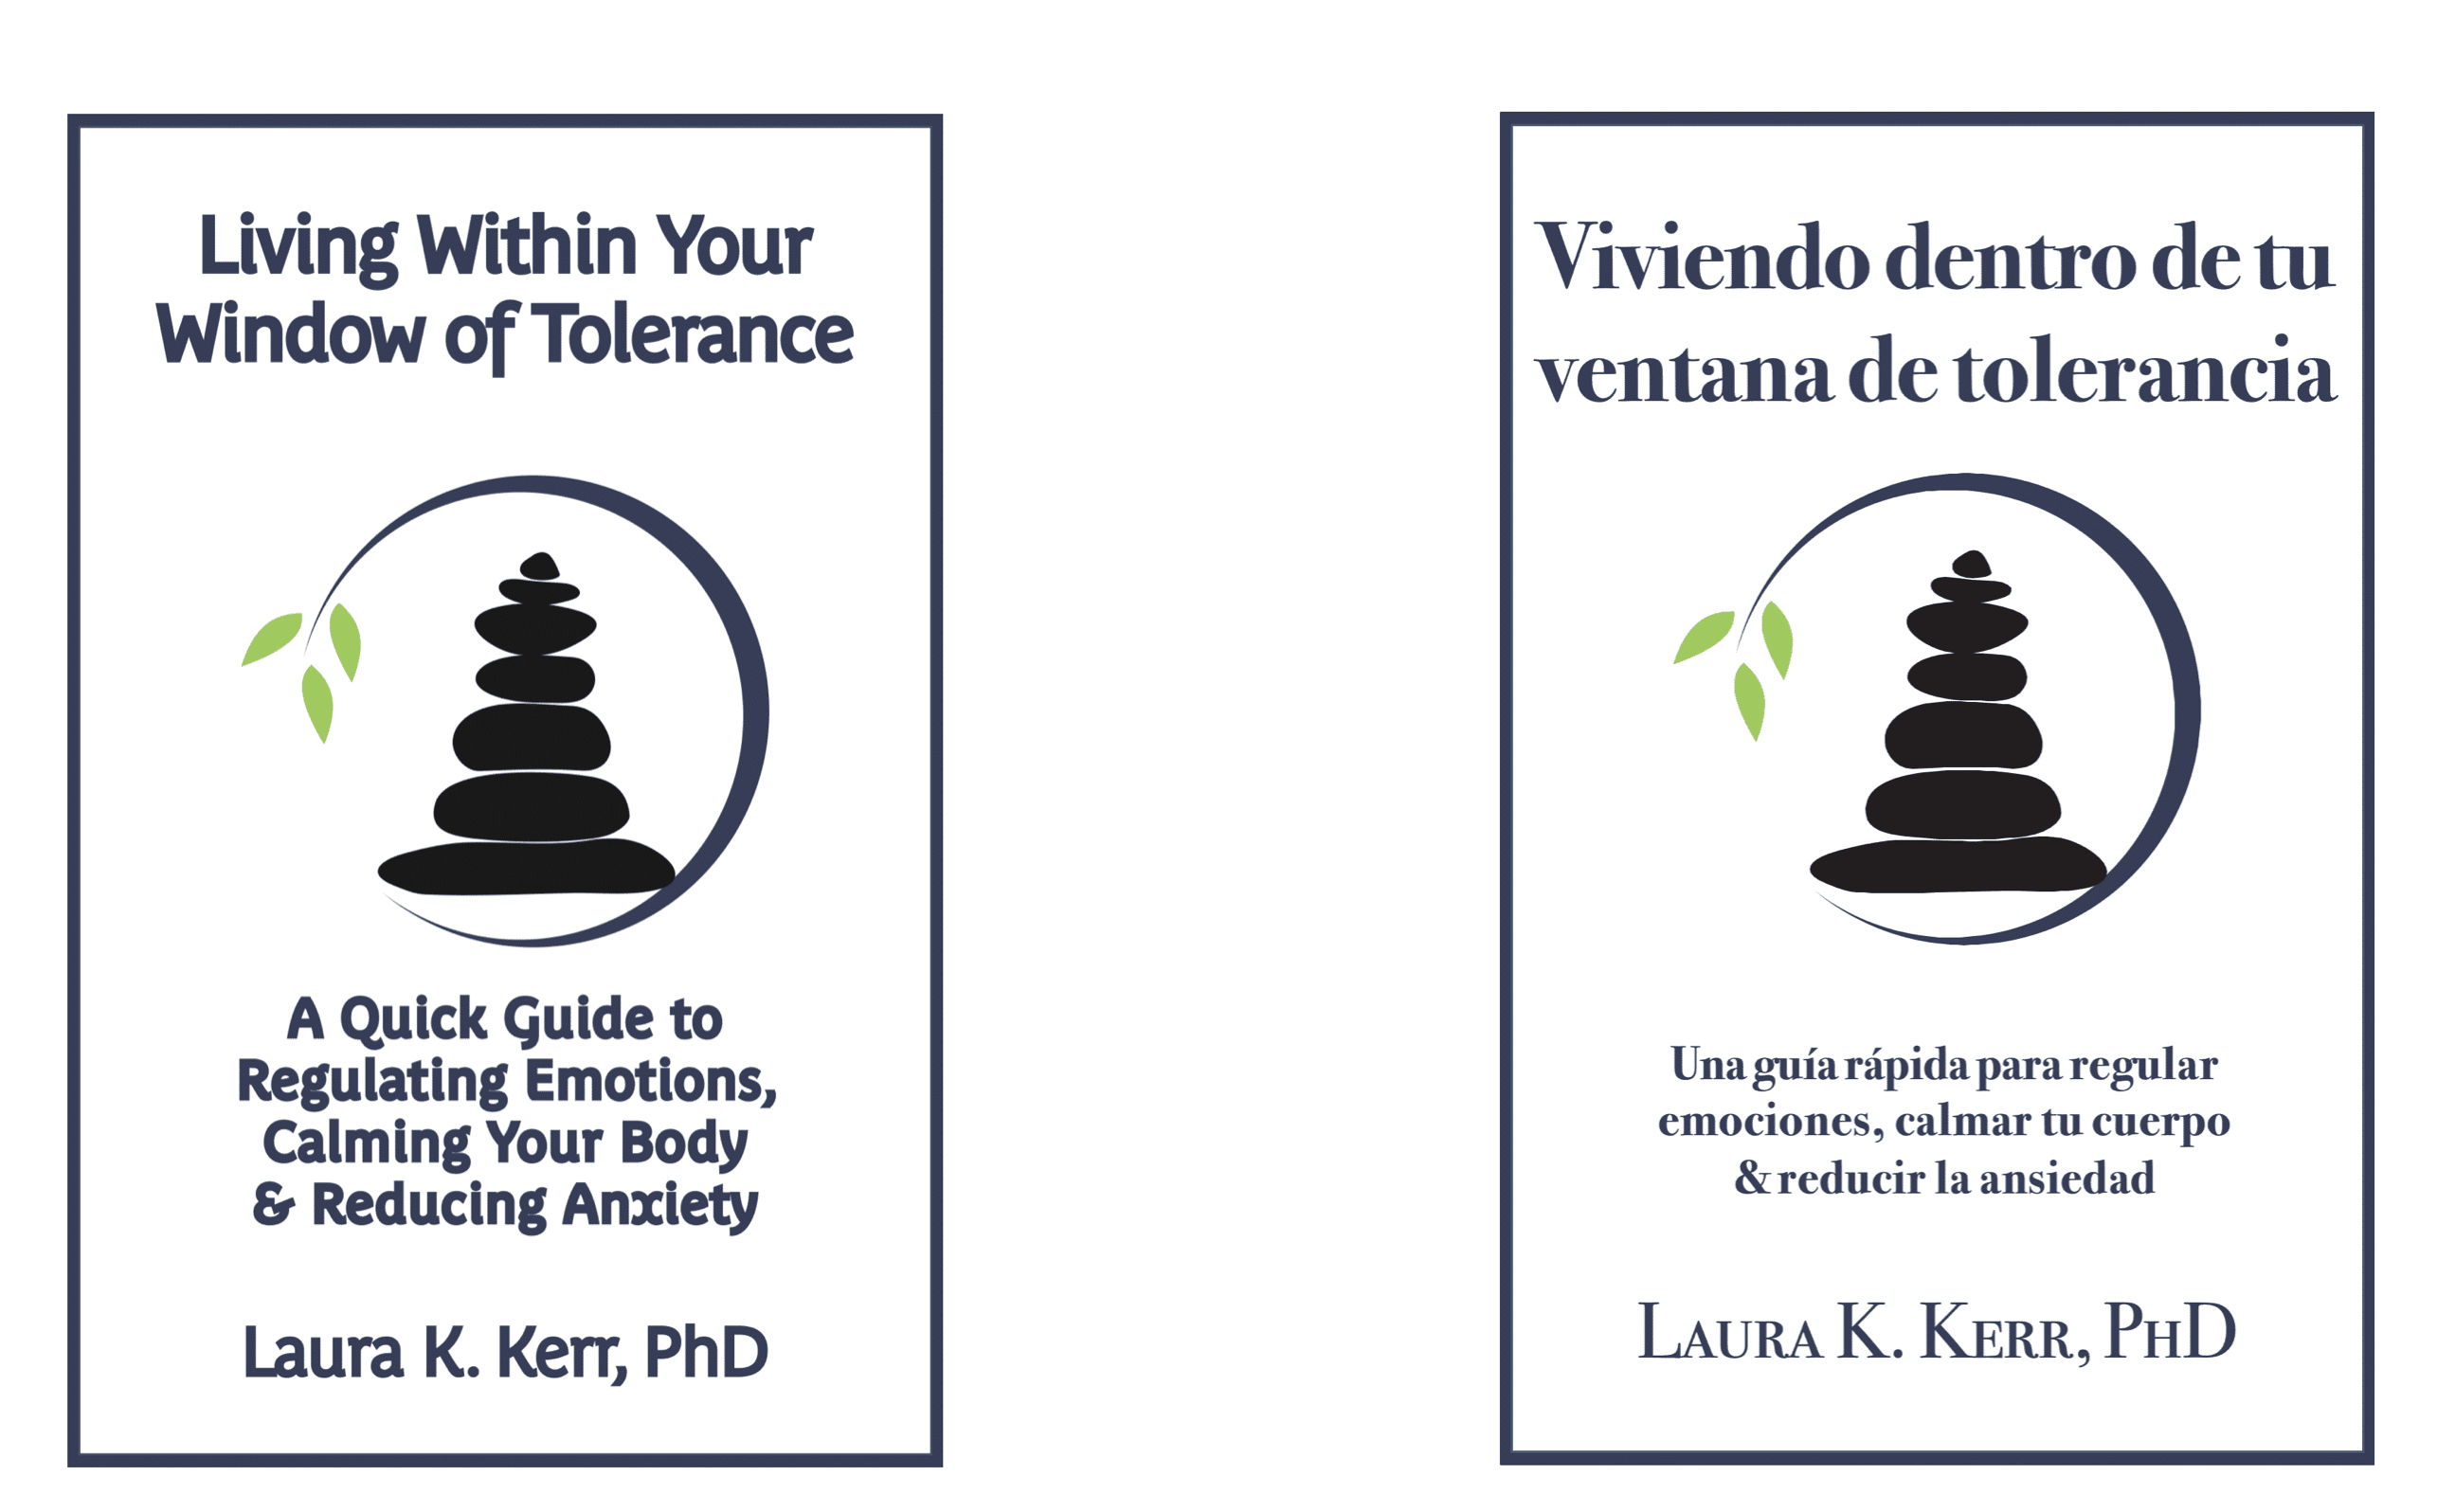 Cover images for "A Quick Guide to Regulating Emotions, Calming Your Body & Reducing Anxiety," by Laura K. Kerr, PhD.